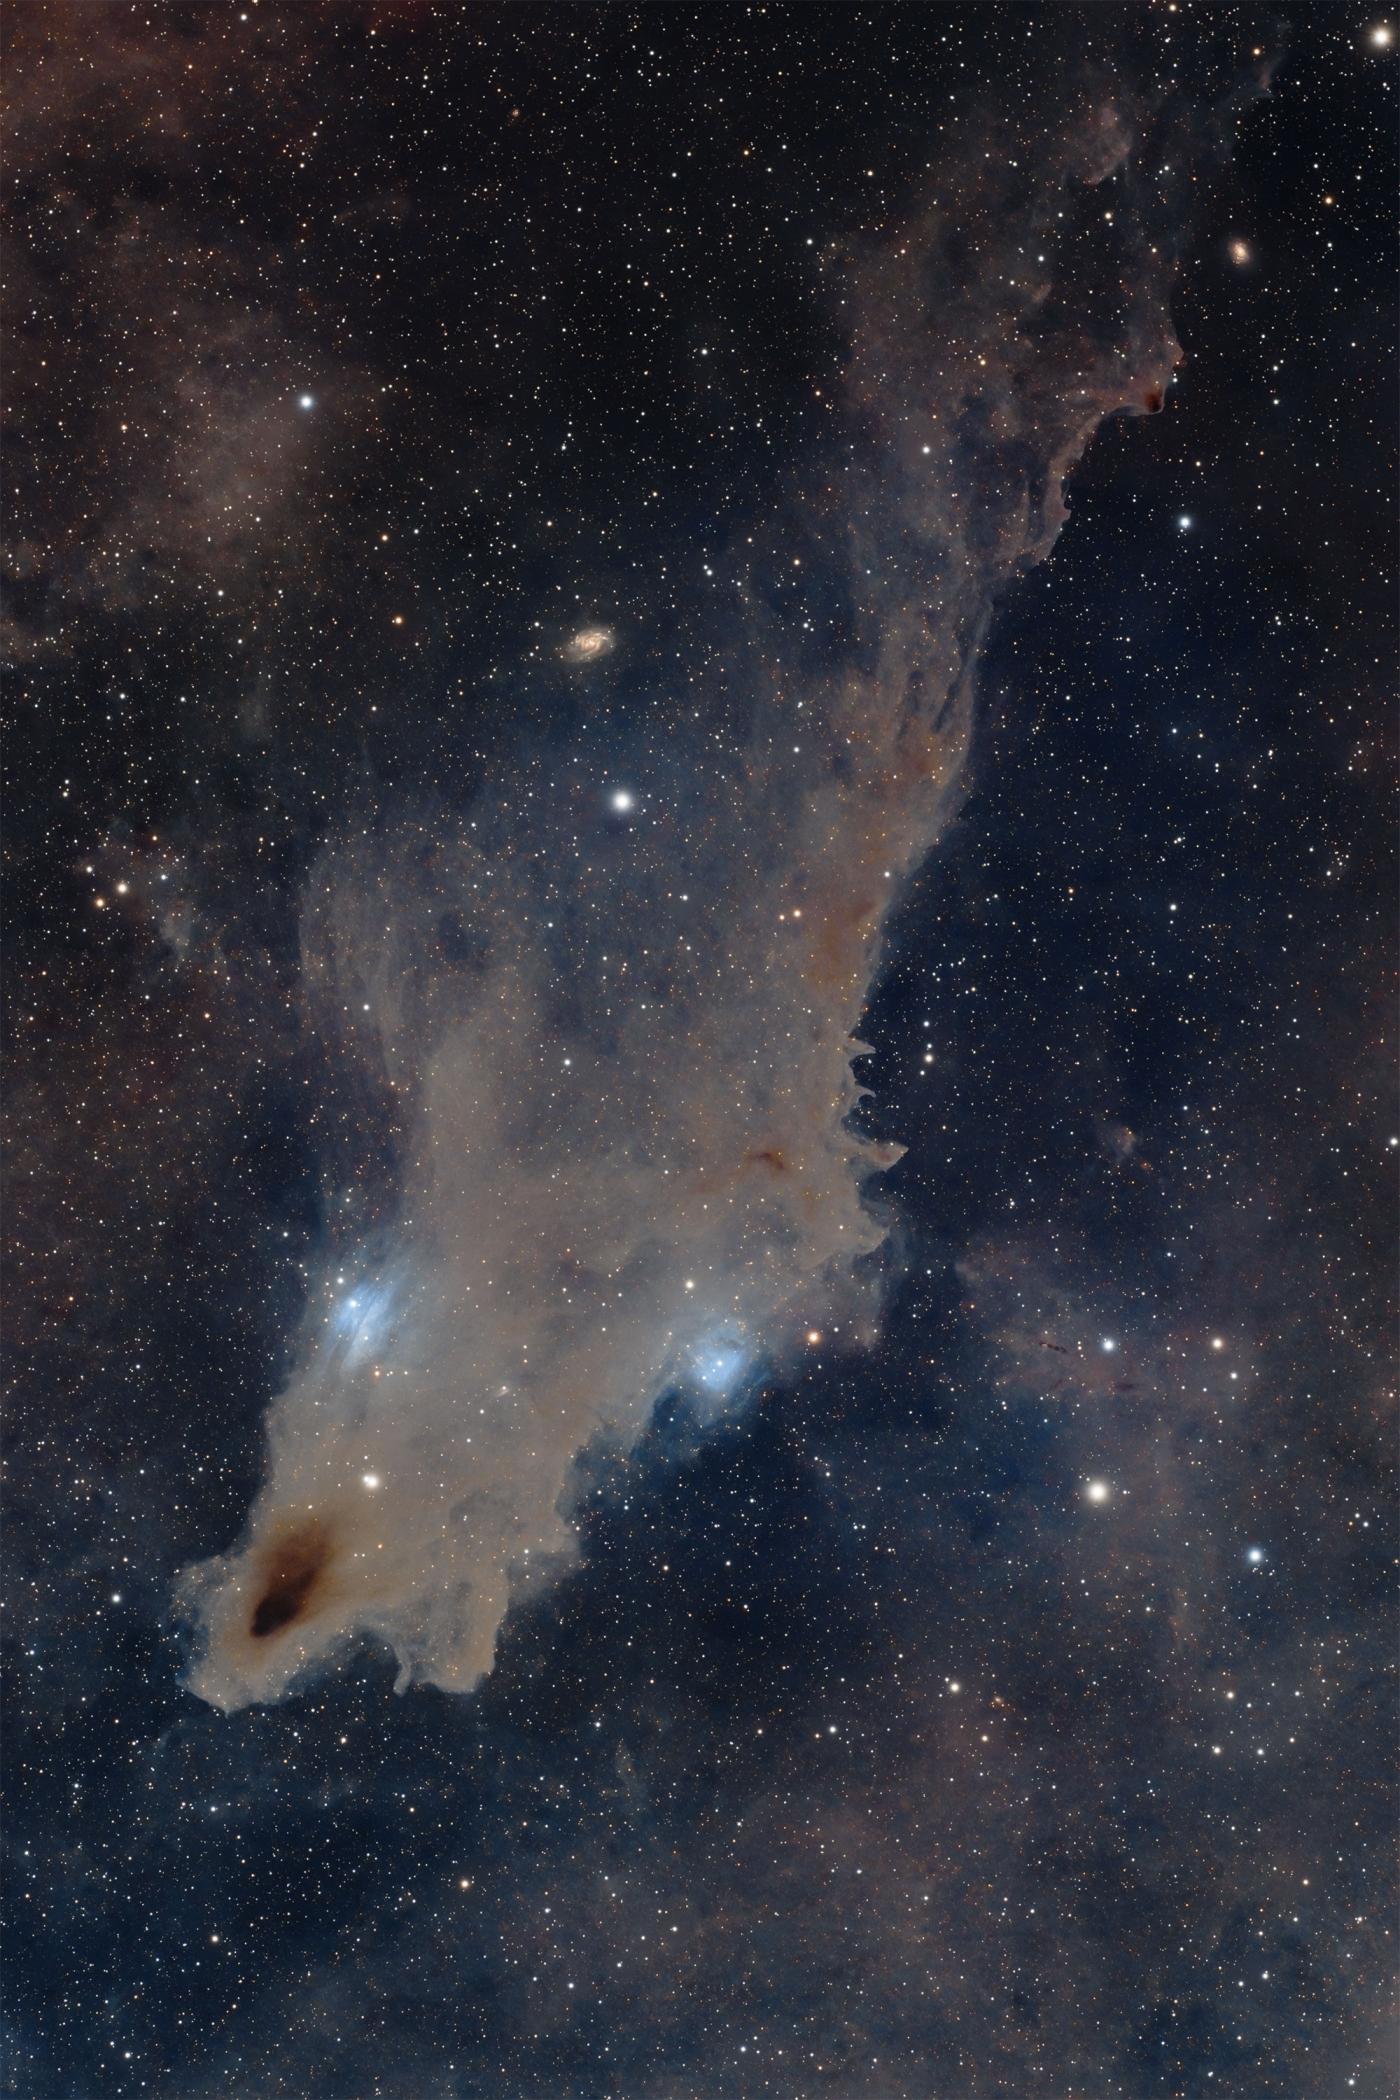 An image showing 'The Dive - LDN 1235 The Dark Shark Nebula in Cepheus'